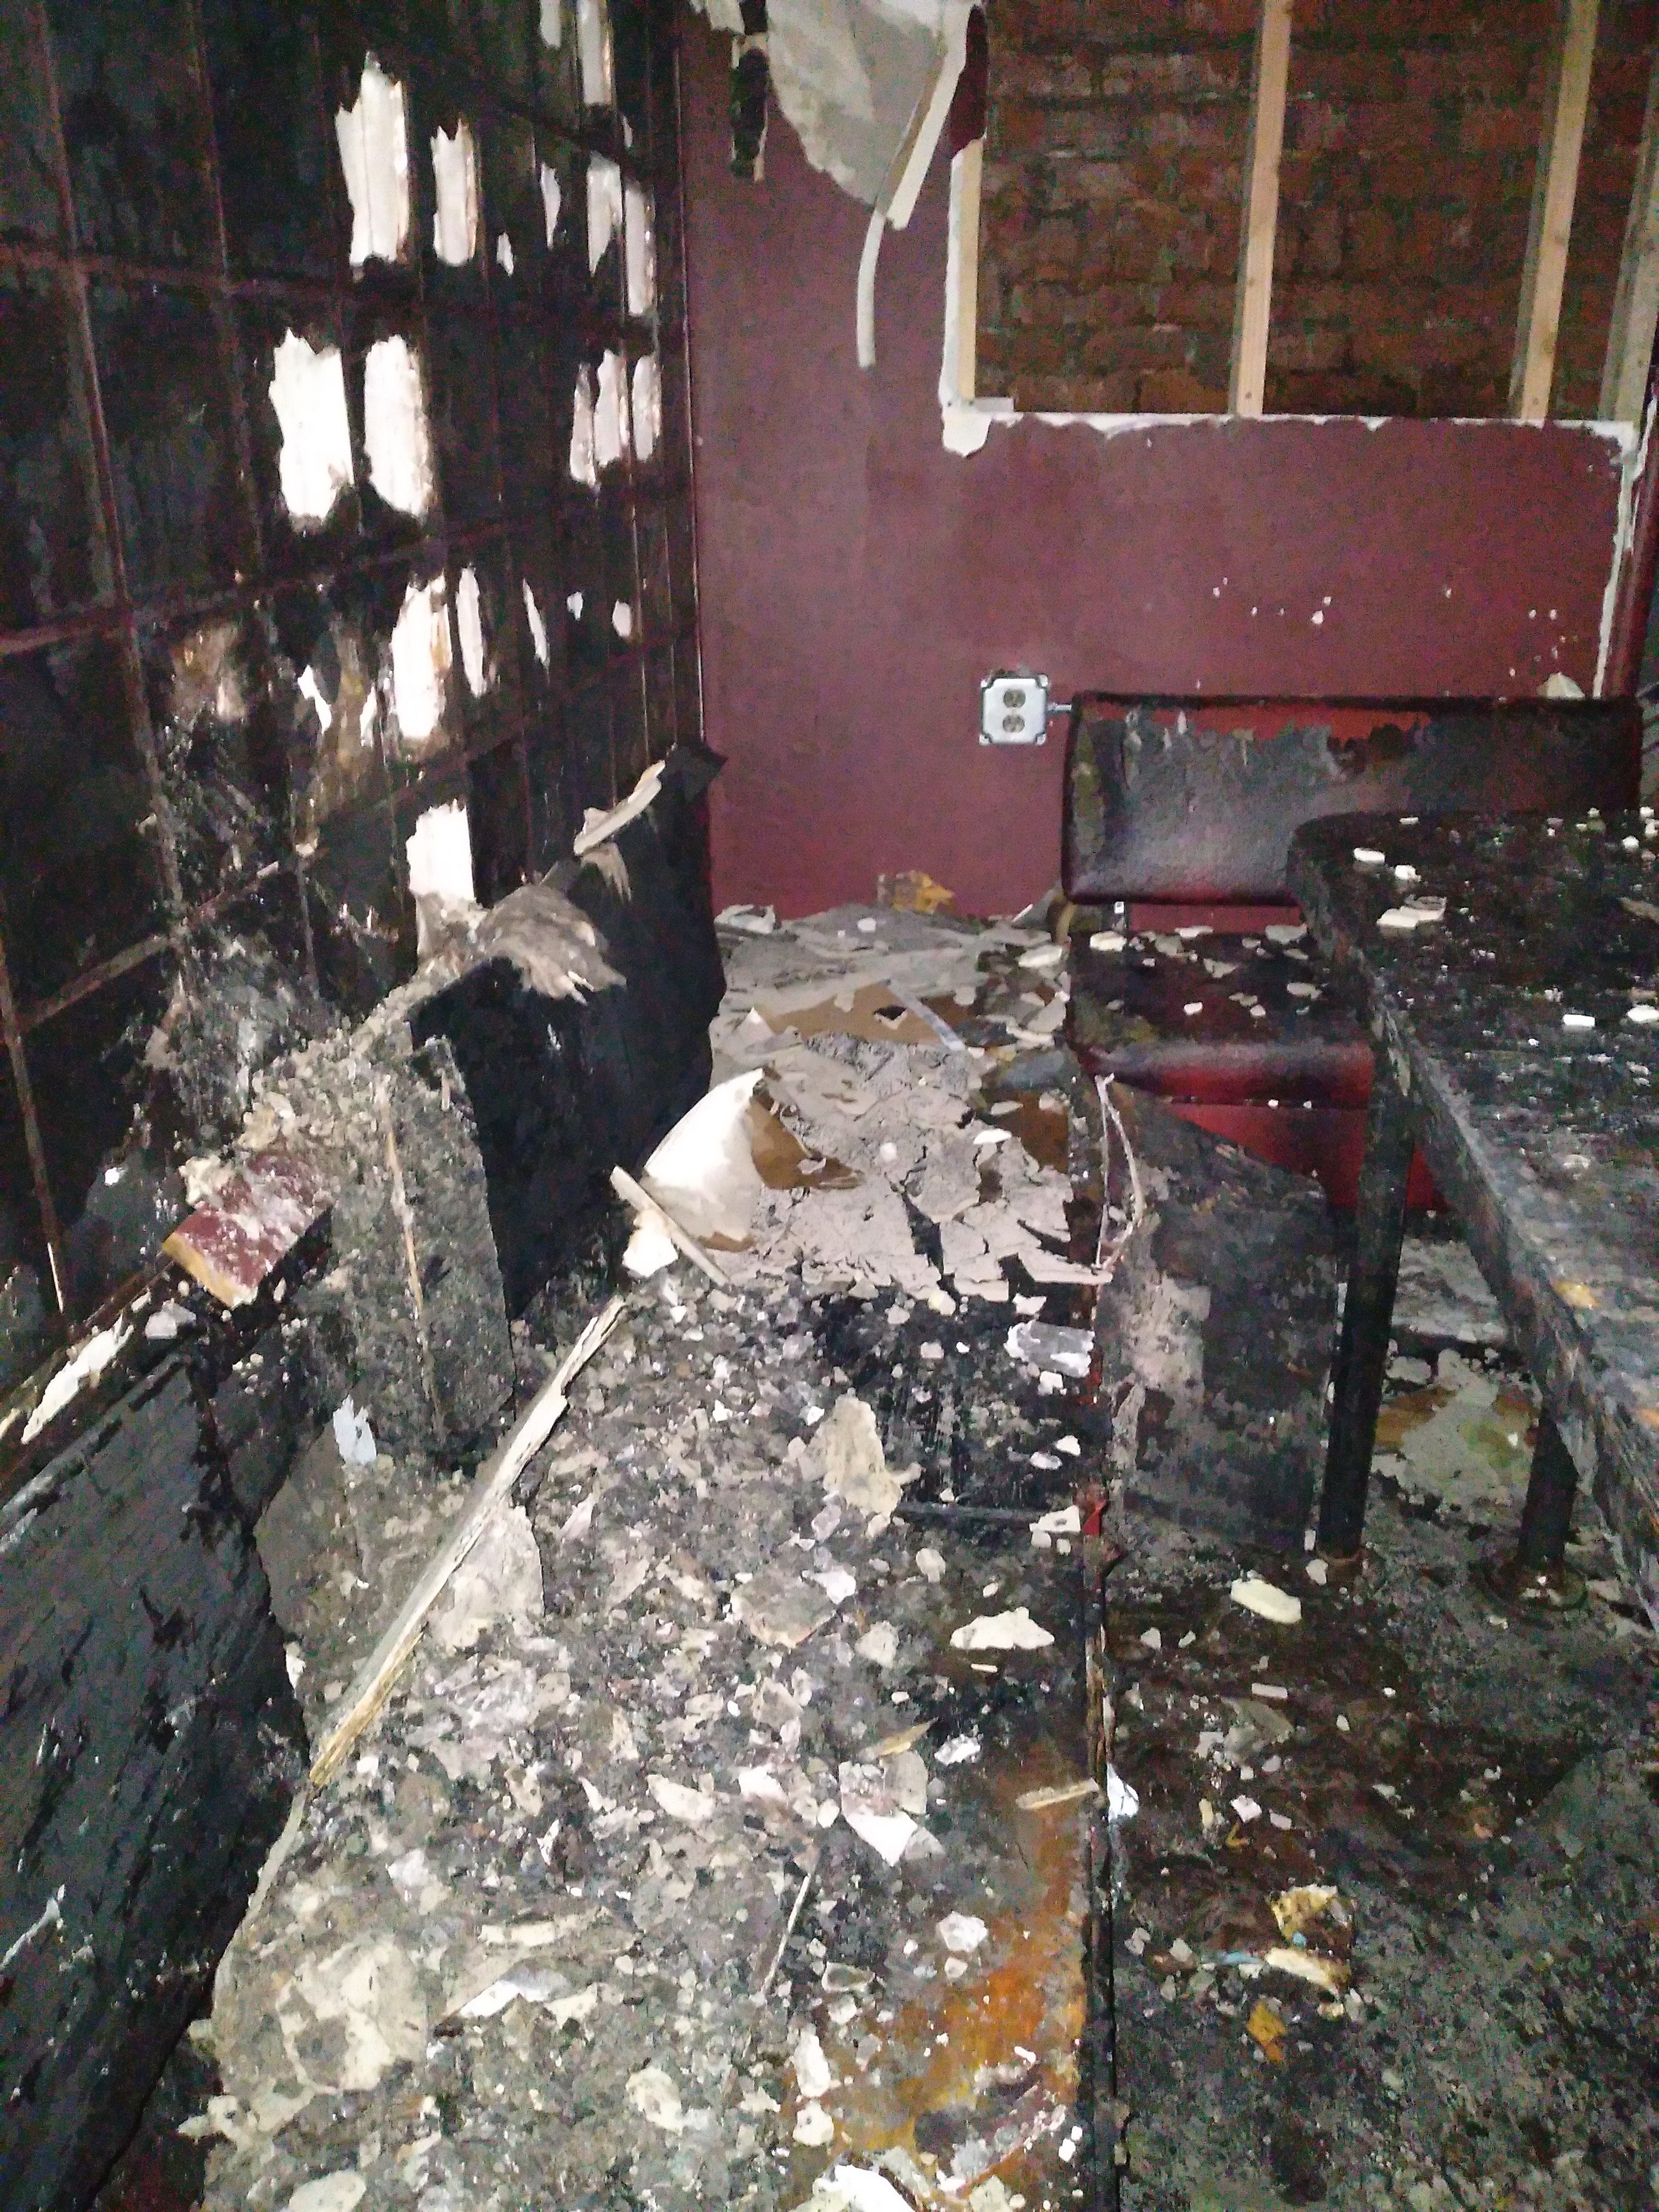 A corner of the bar&#x27;s interior is burned with debris everywhere and parts of the window broken